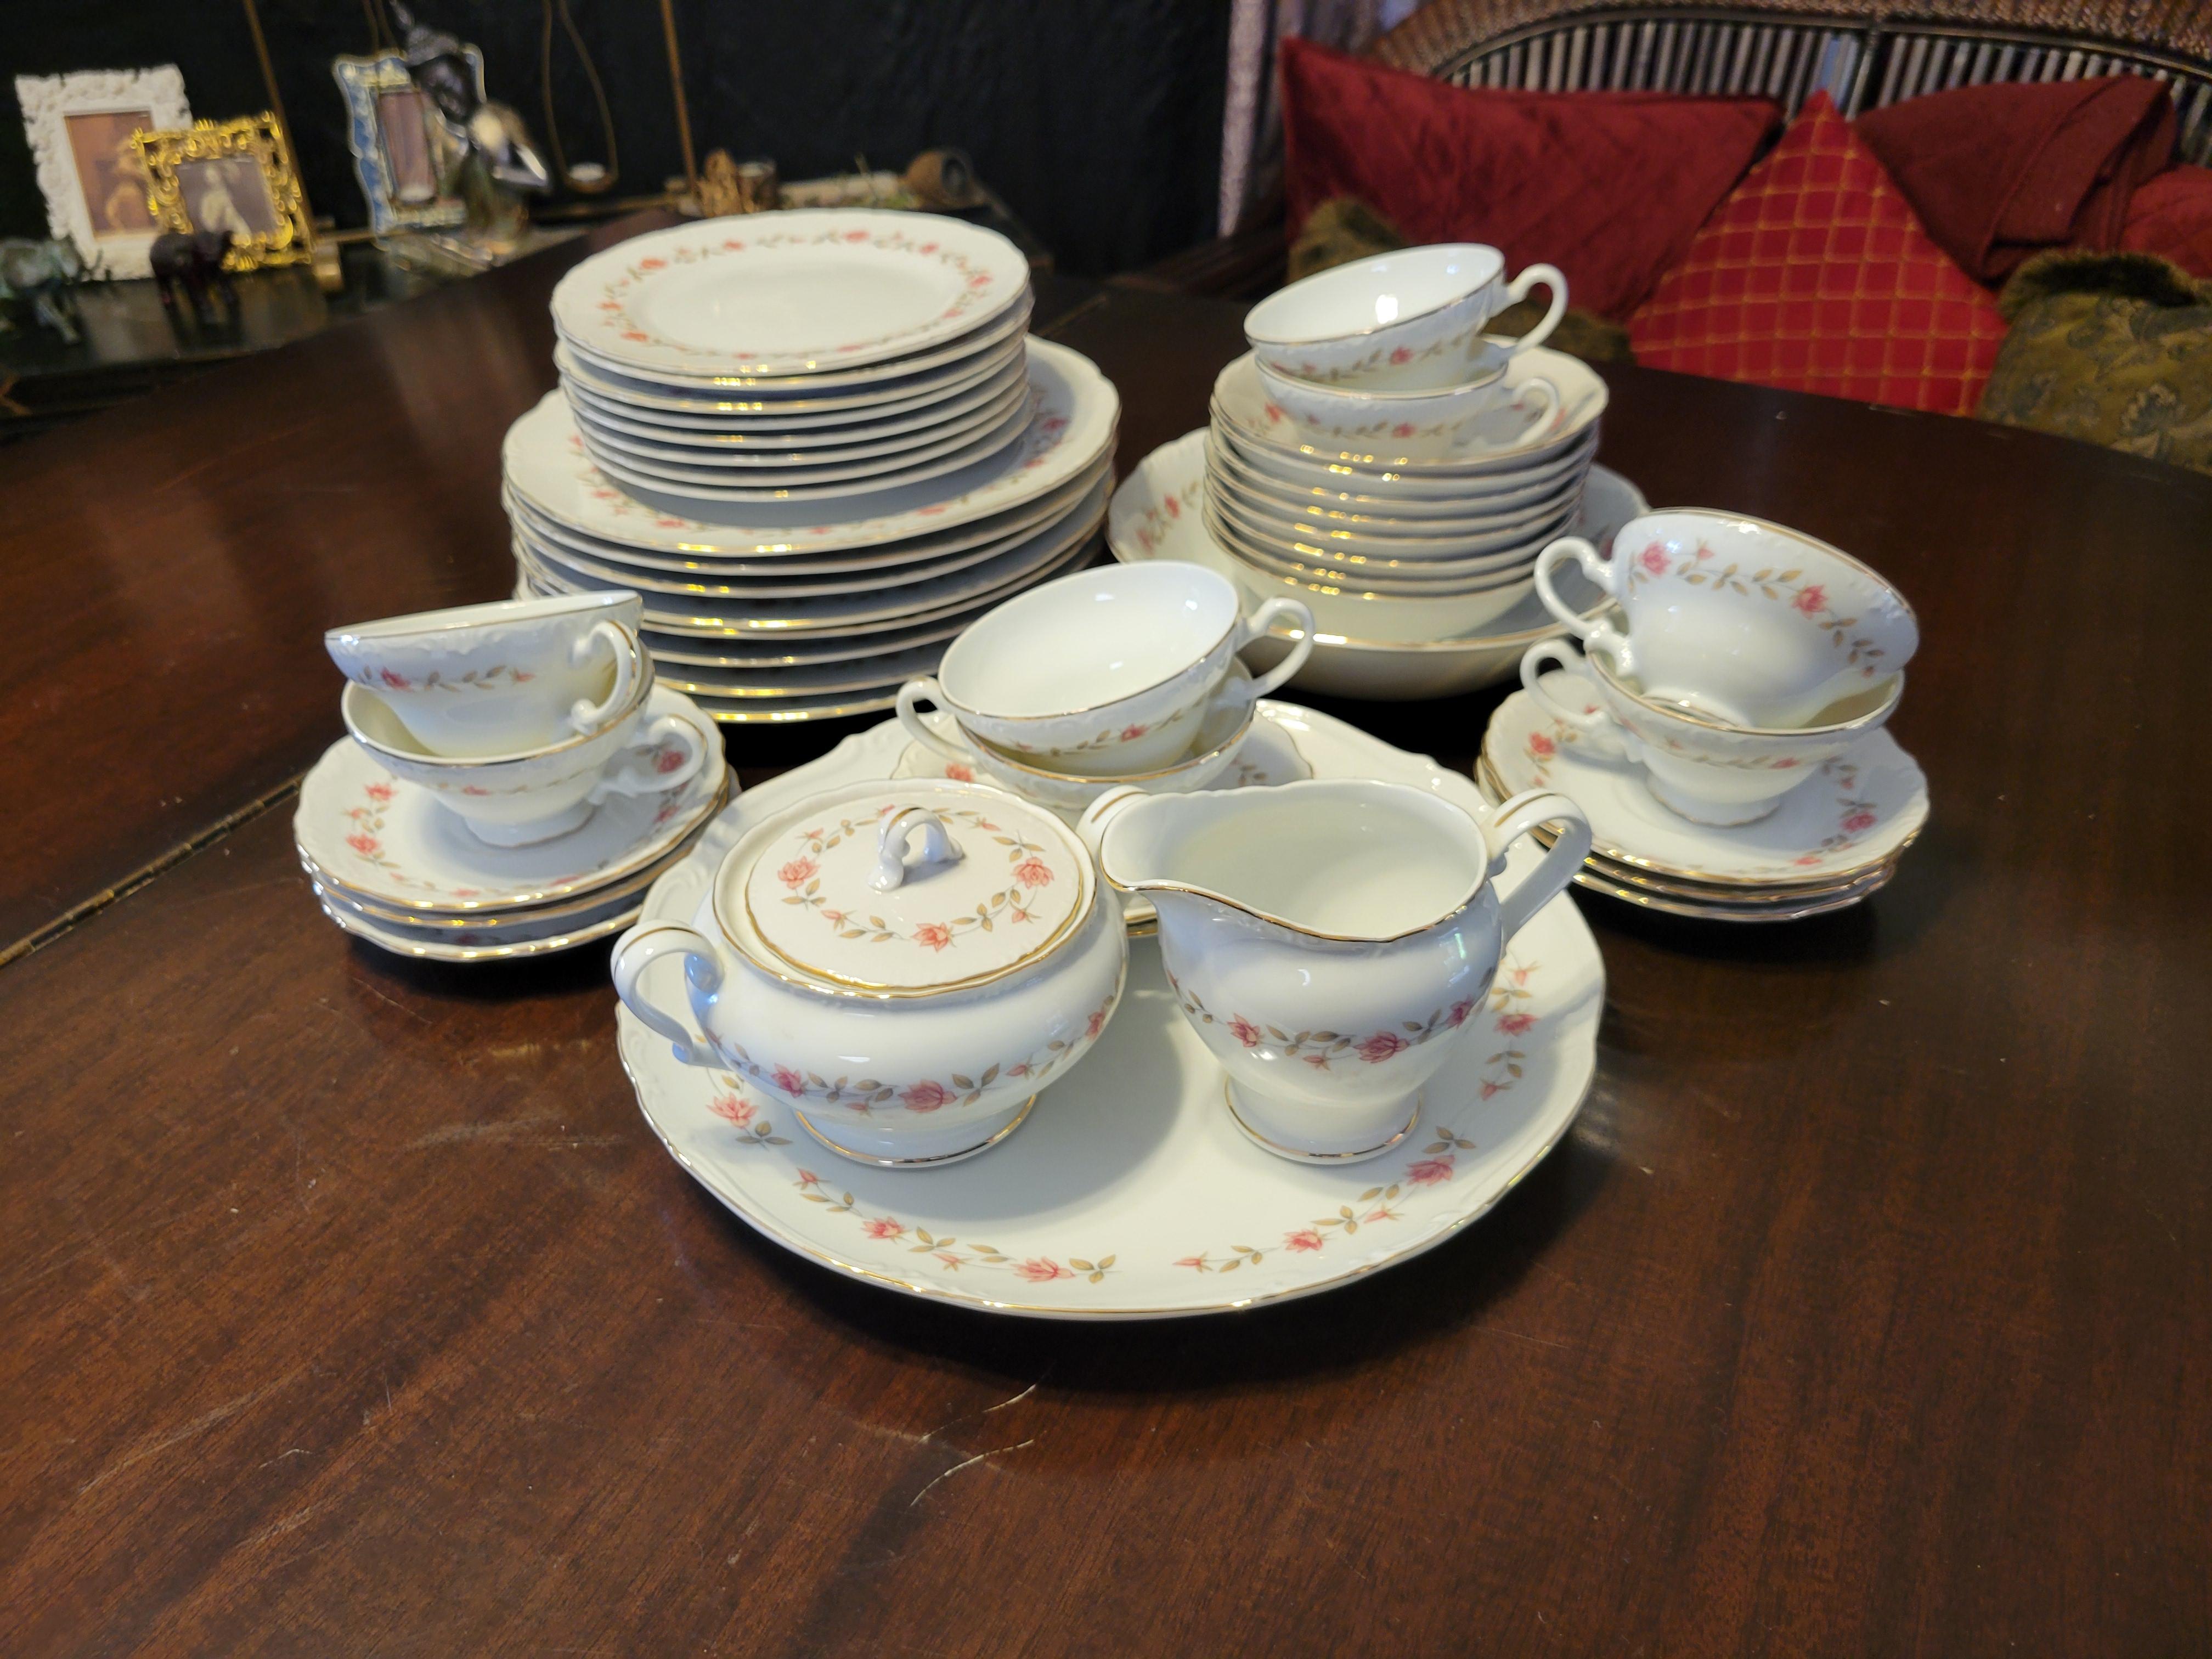 Vintage, Eternal Rose (Japan) Fine China Dining Set for 8 - 44 pieces In Excellent Condition For Sale In Phoenix, AZ